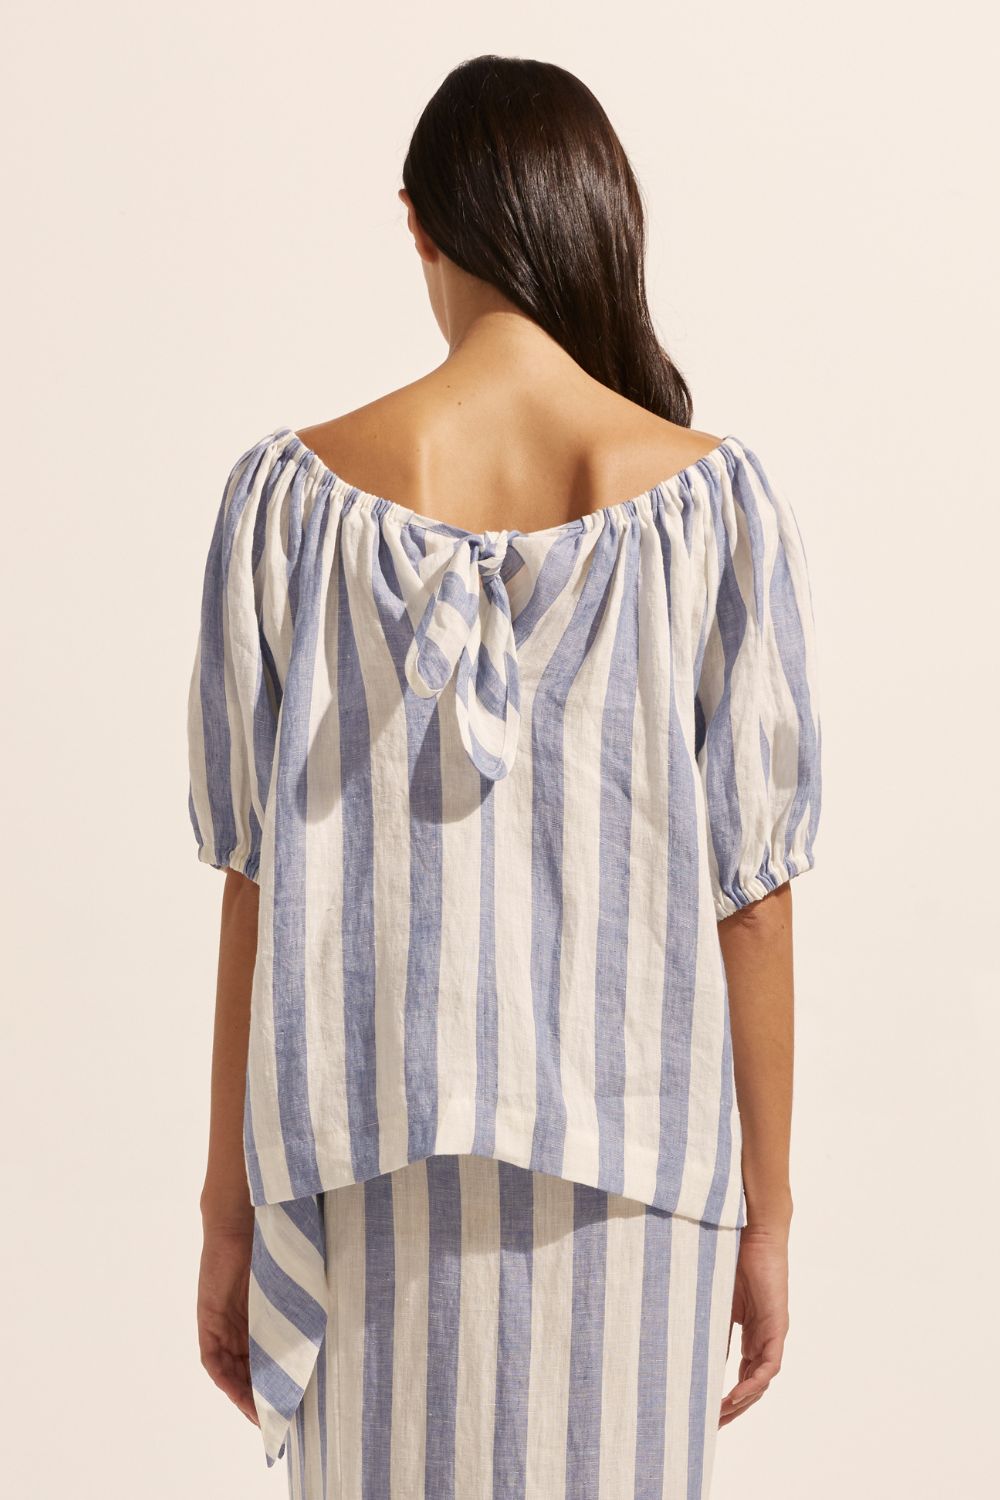 blue and white stripe, top, off the shoulder, mid length sleeve, back image